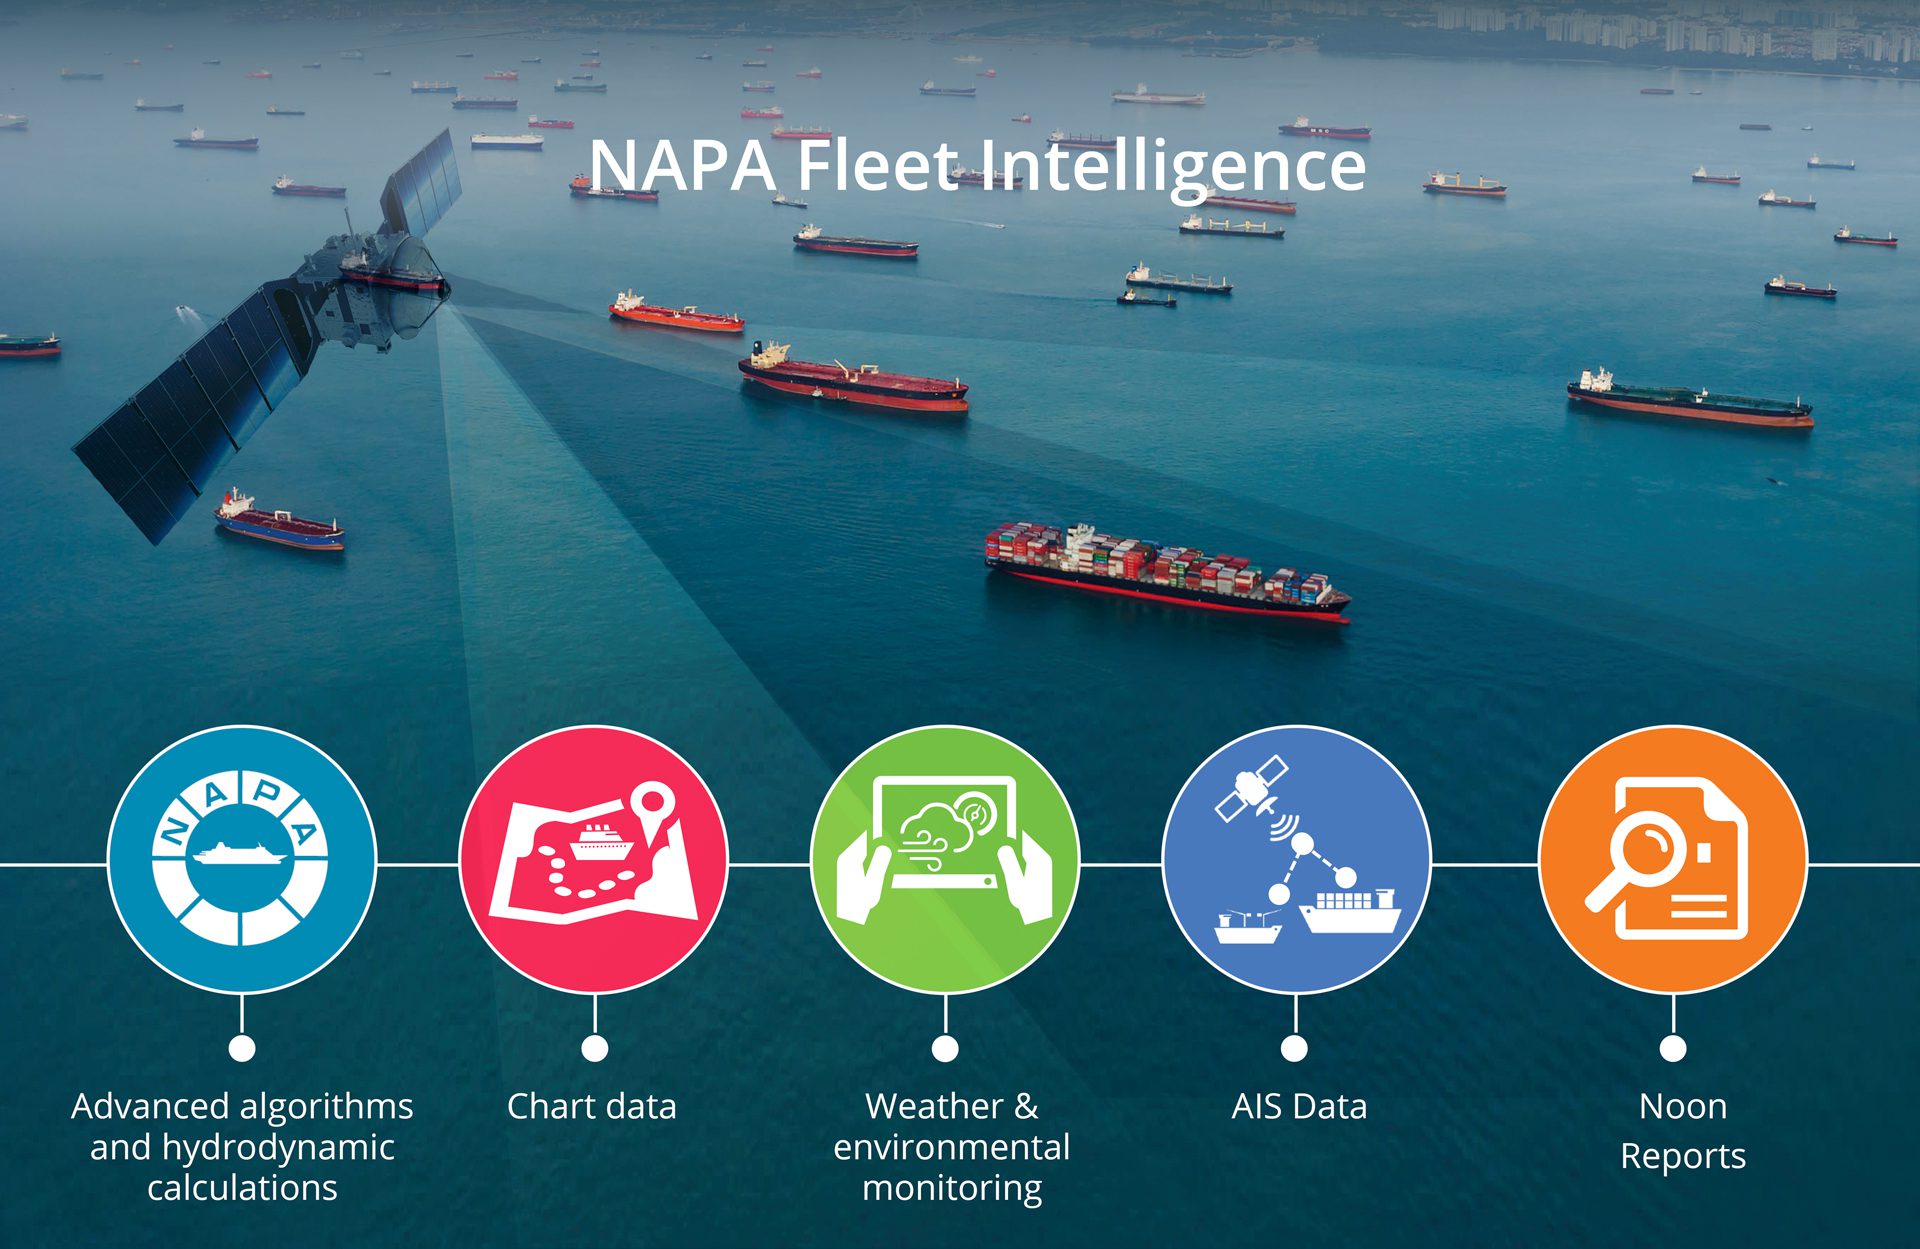 NAPA Fleet Intelligence combines several data sources for ship performance monitoring